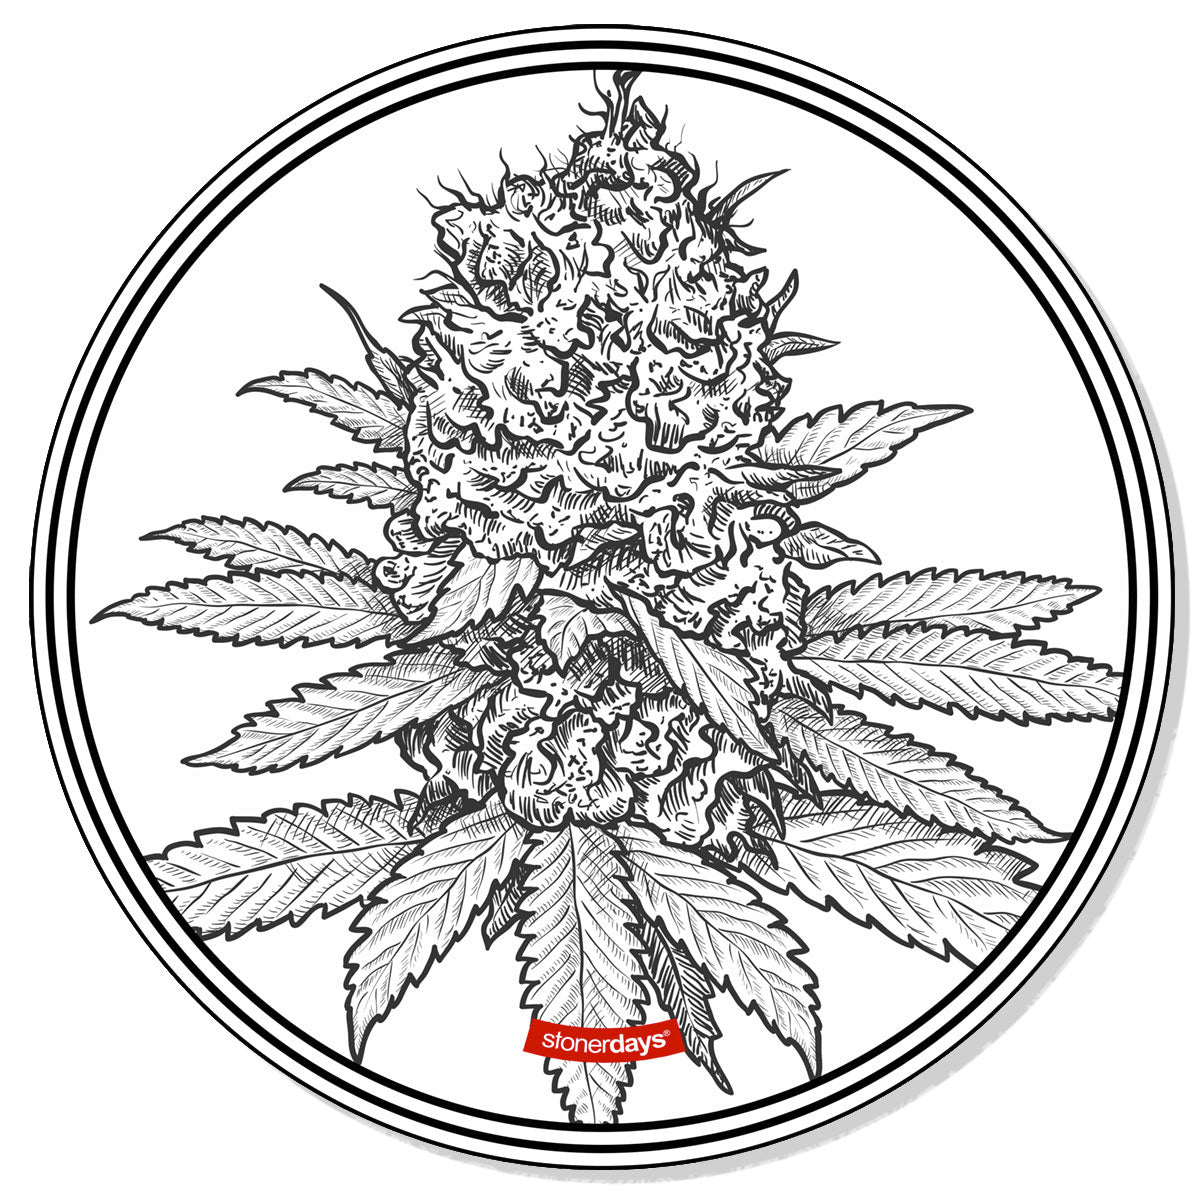 StonerDays round creativity mat with detailed cannabis plant illustration, 1/4" thick rubber